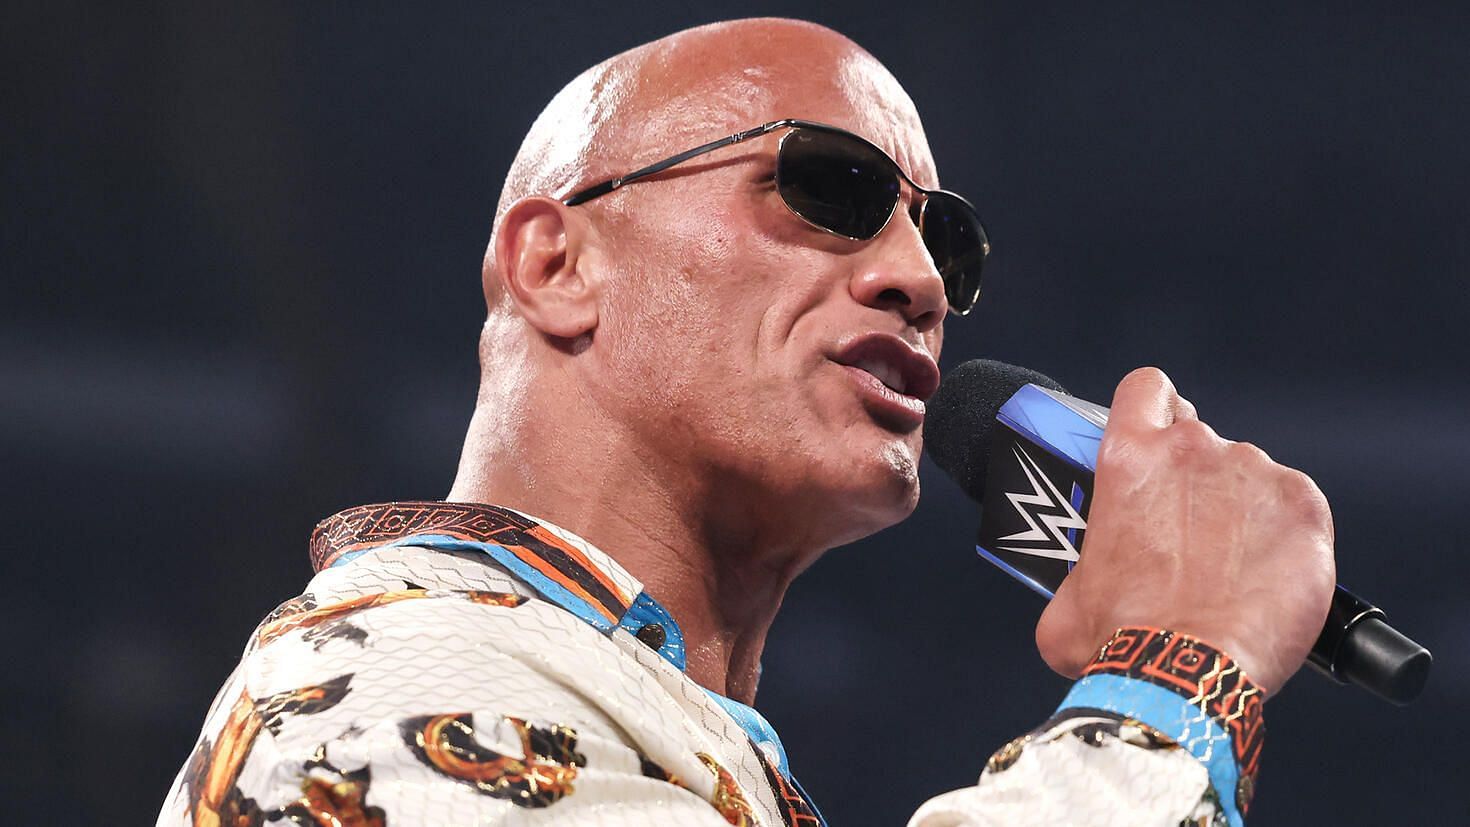 The Rock cutting a promo on SmackDown